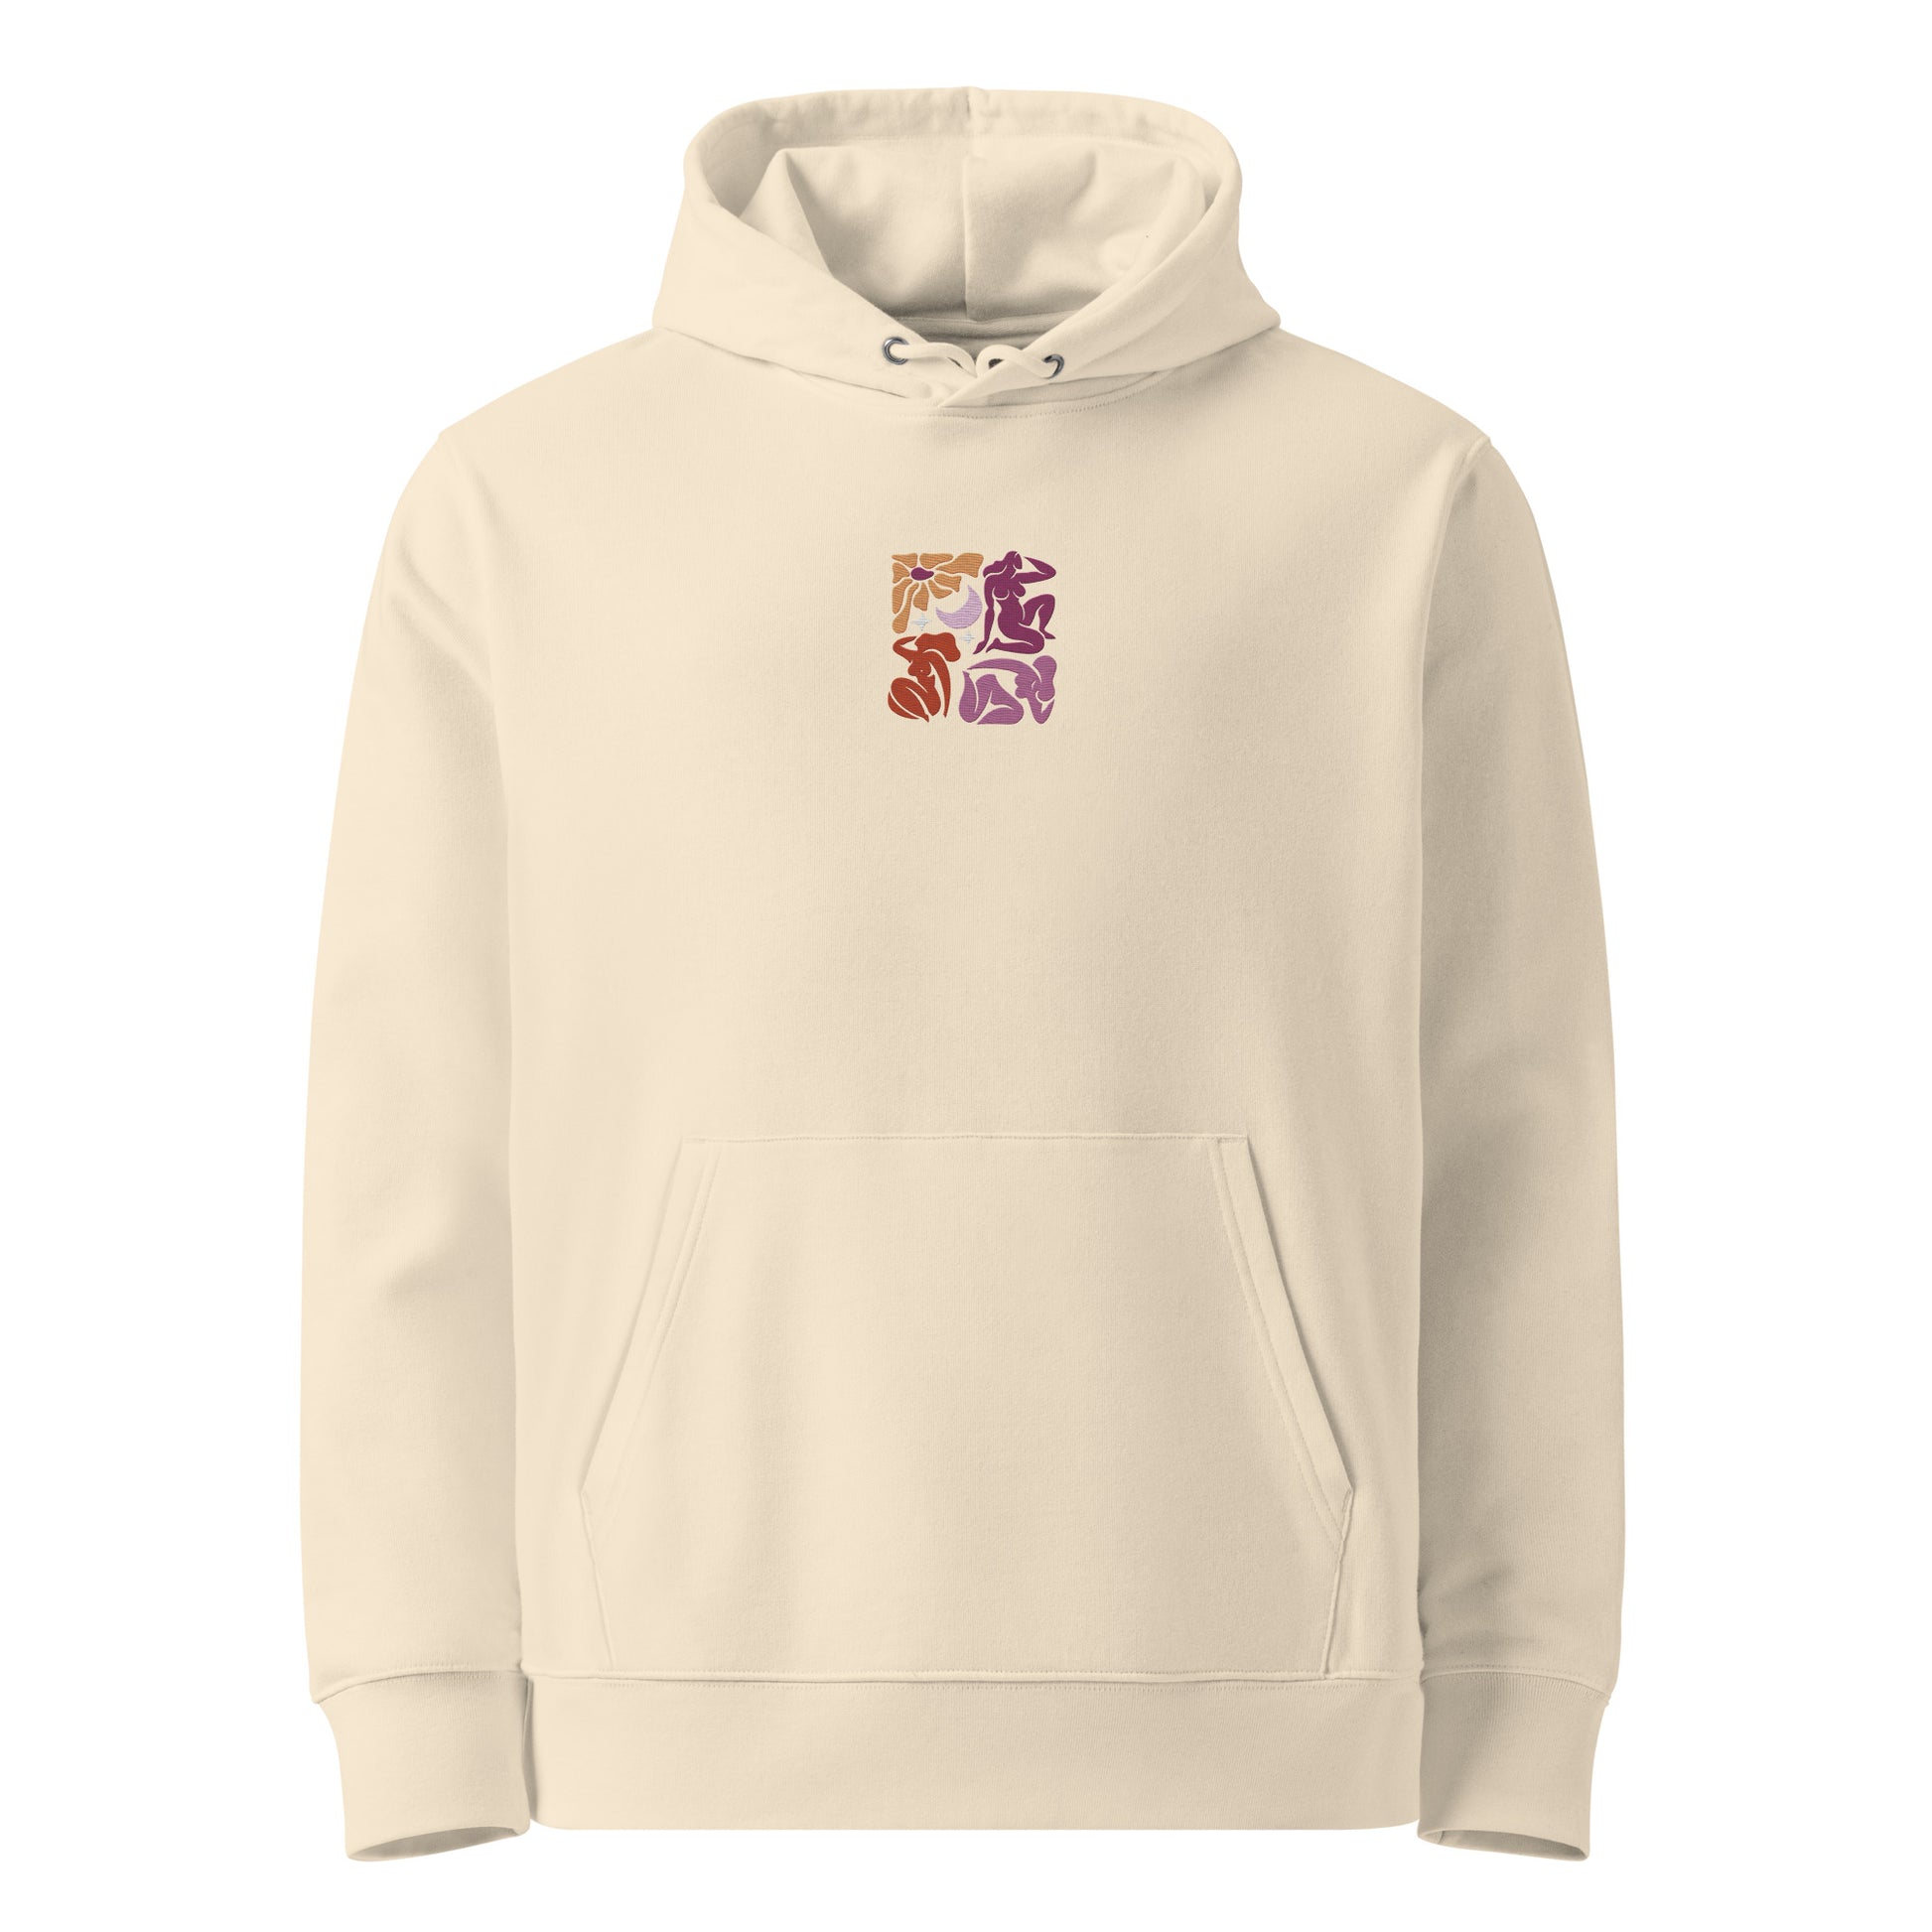 Unisex eco-friendly desert dust hoodie featuring an embroidered Matisse mosaic-inspired design centered chest in lesbian colors, with the same design printed large on the back  - adding a touch of lgbtq to your outfit. sizes: small, medium, large, extra large, double extra large.